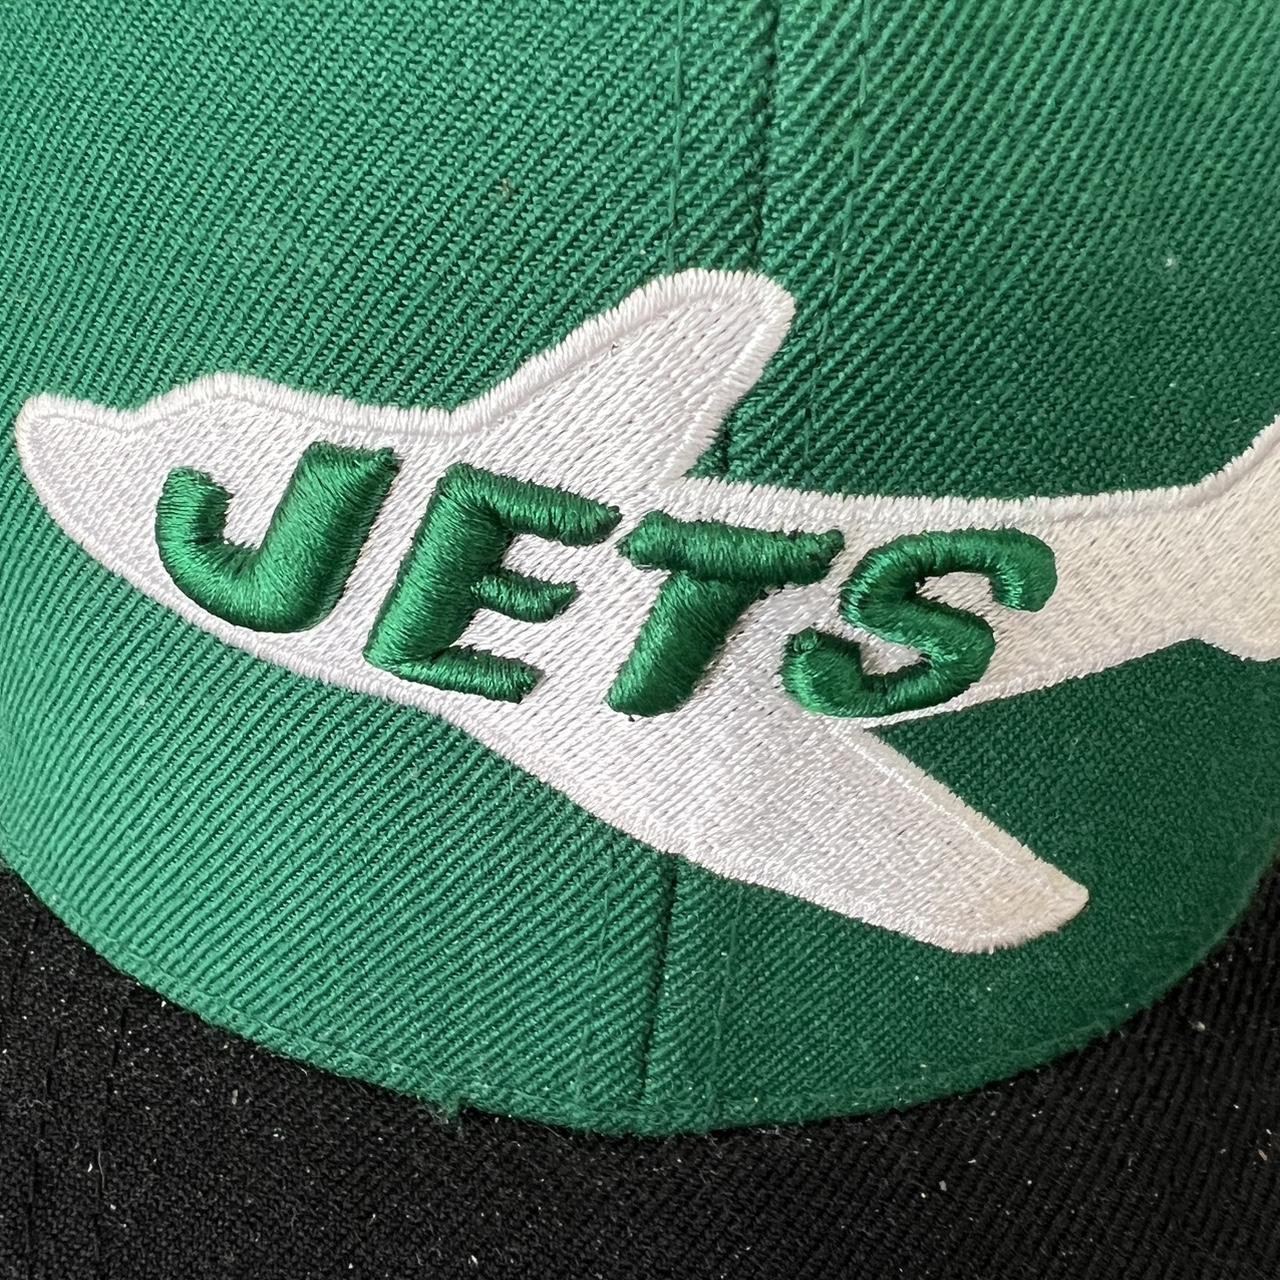 Mitchell & Ness New York Jets NFL Snap-Back Hat in stock at SPoT